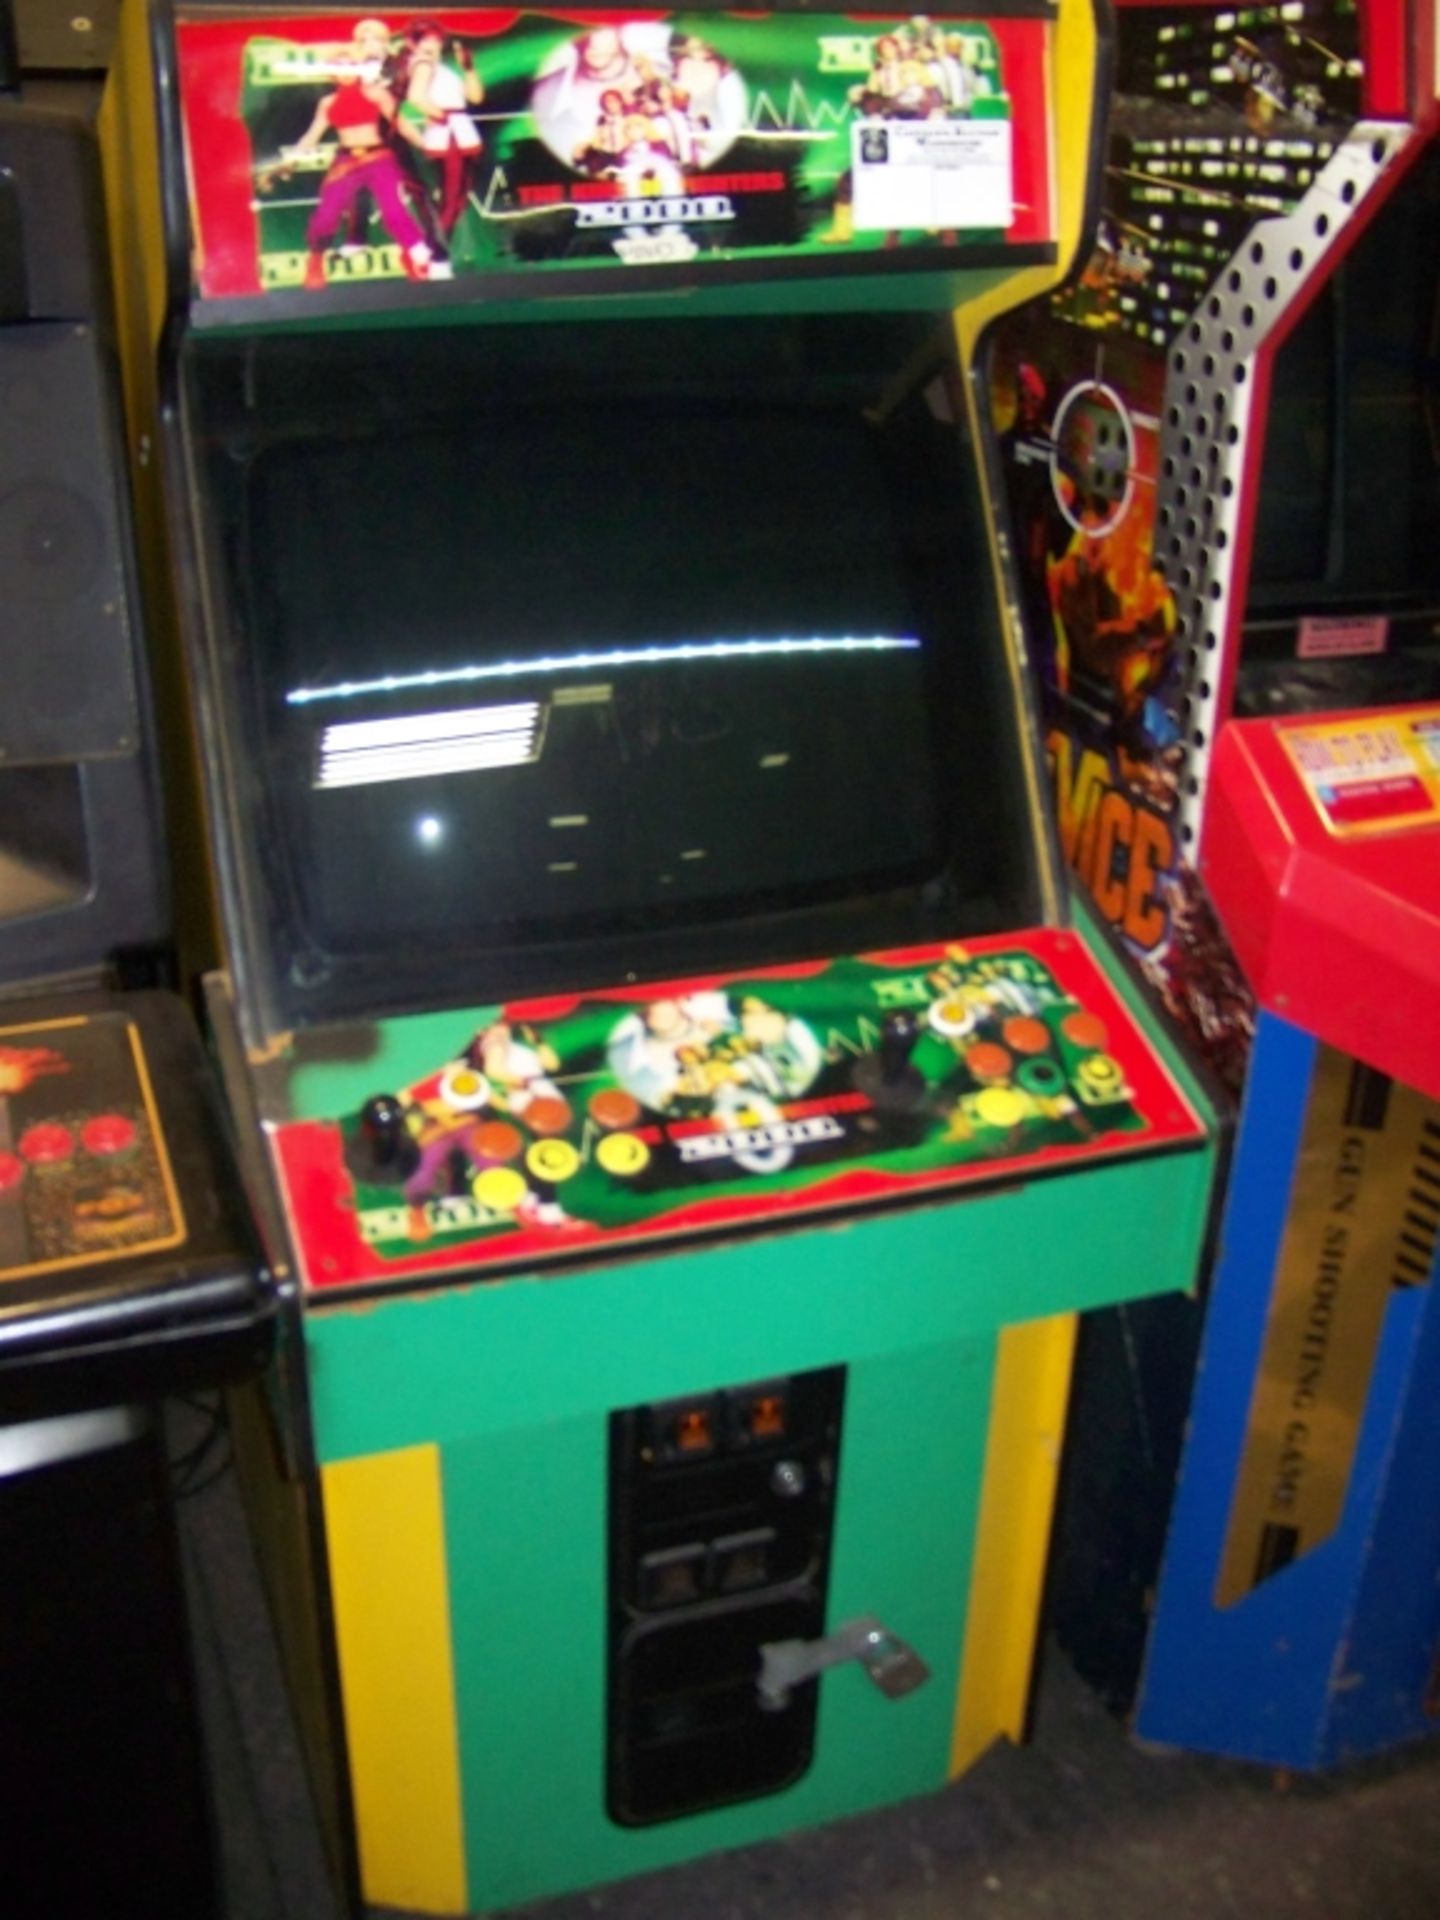 KING OF FIGHTERS 2000 ARCADE GAME